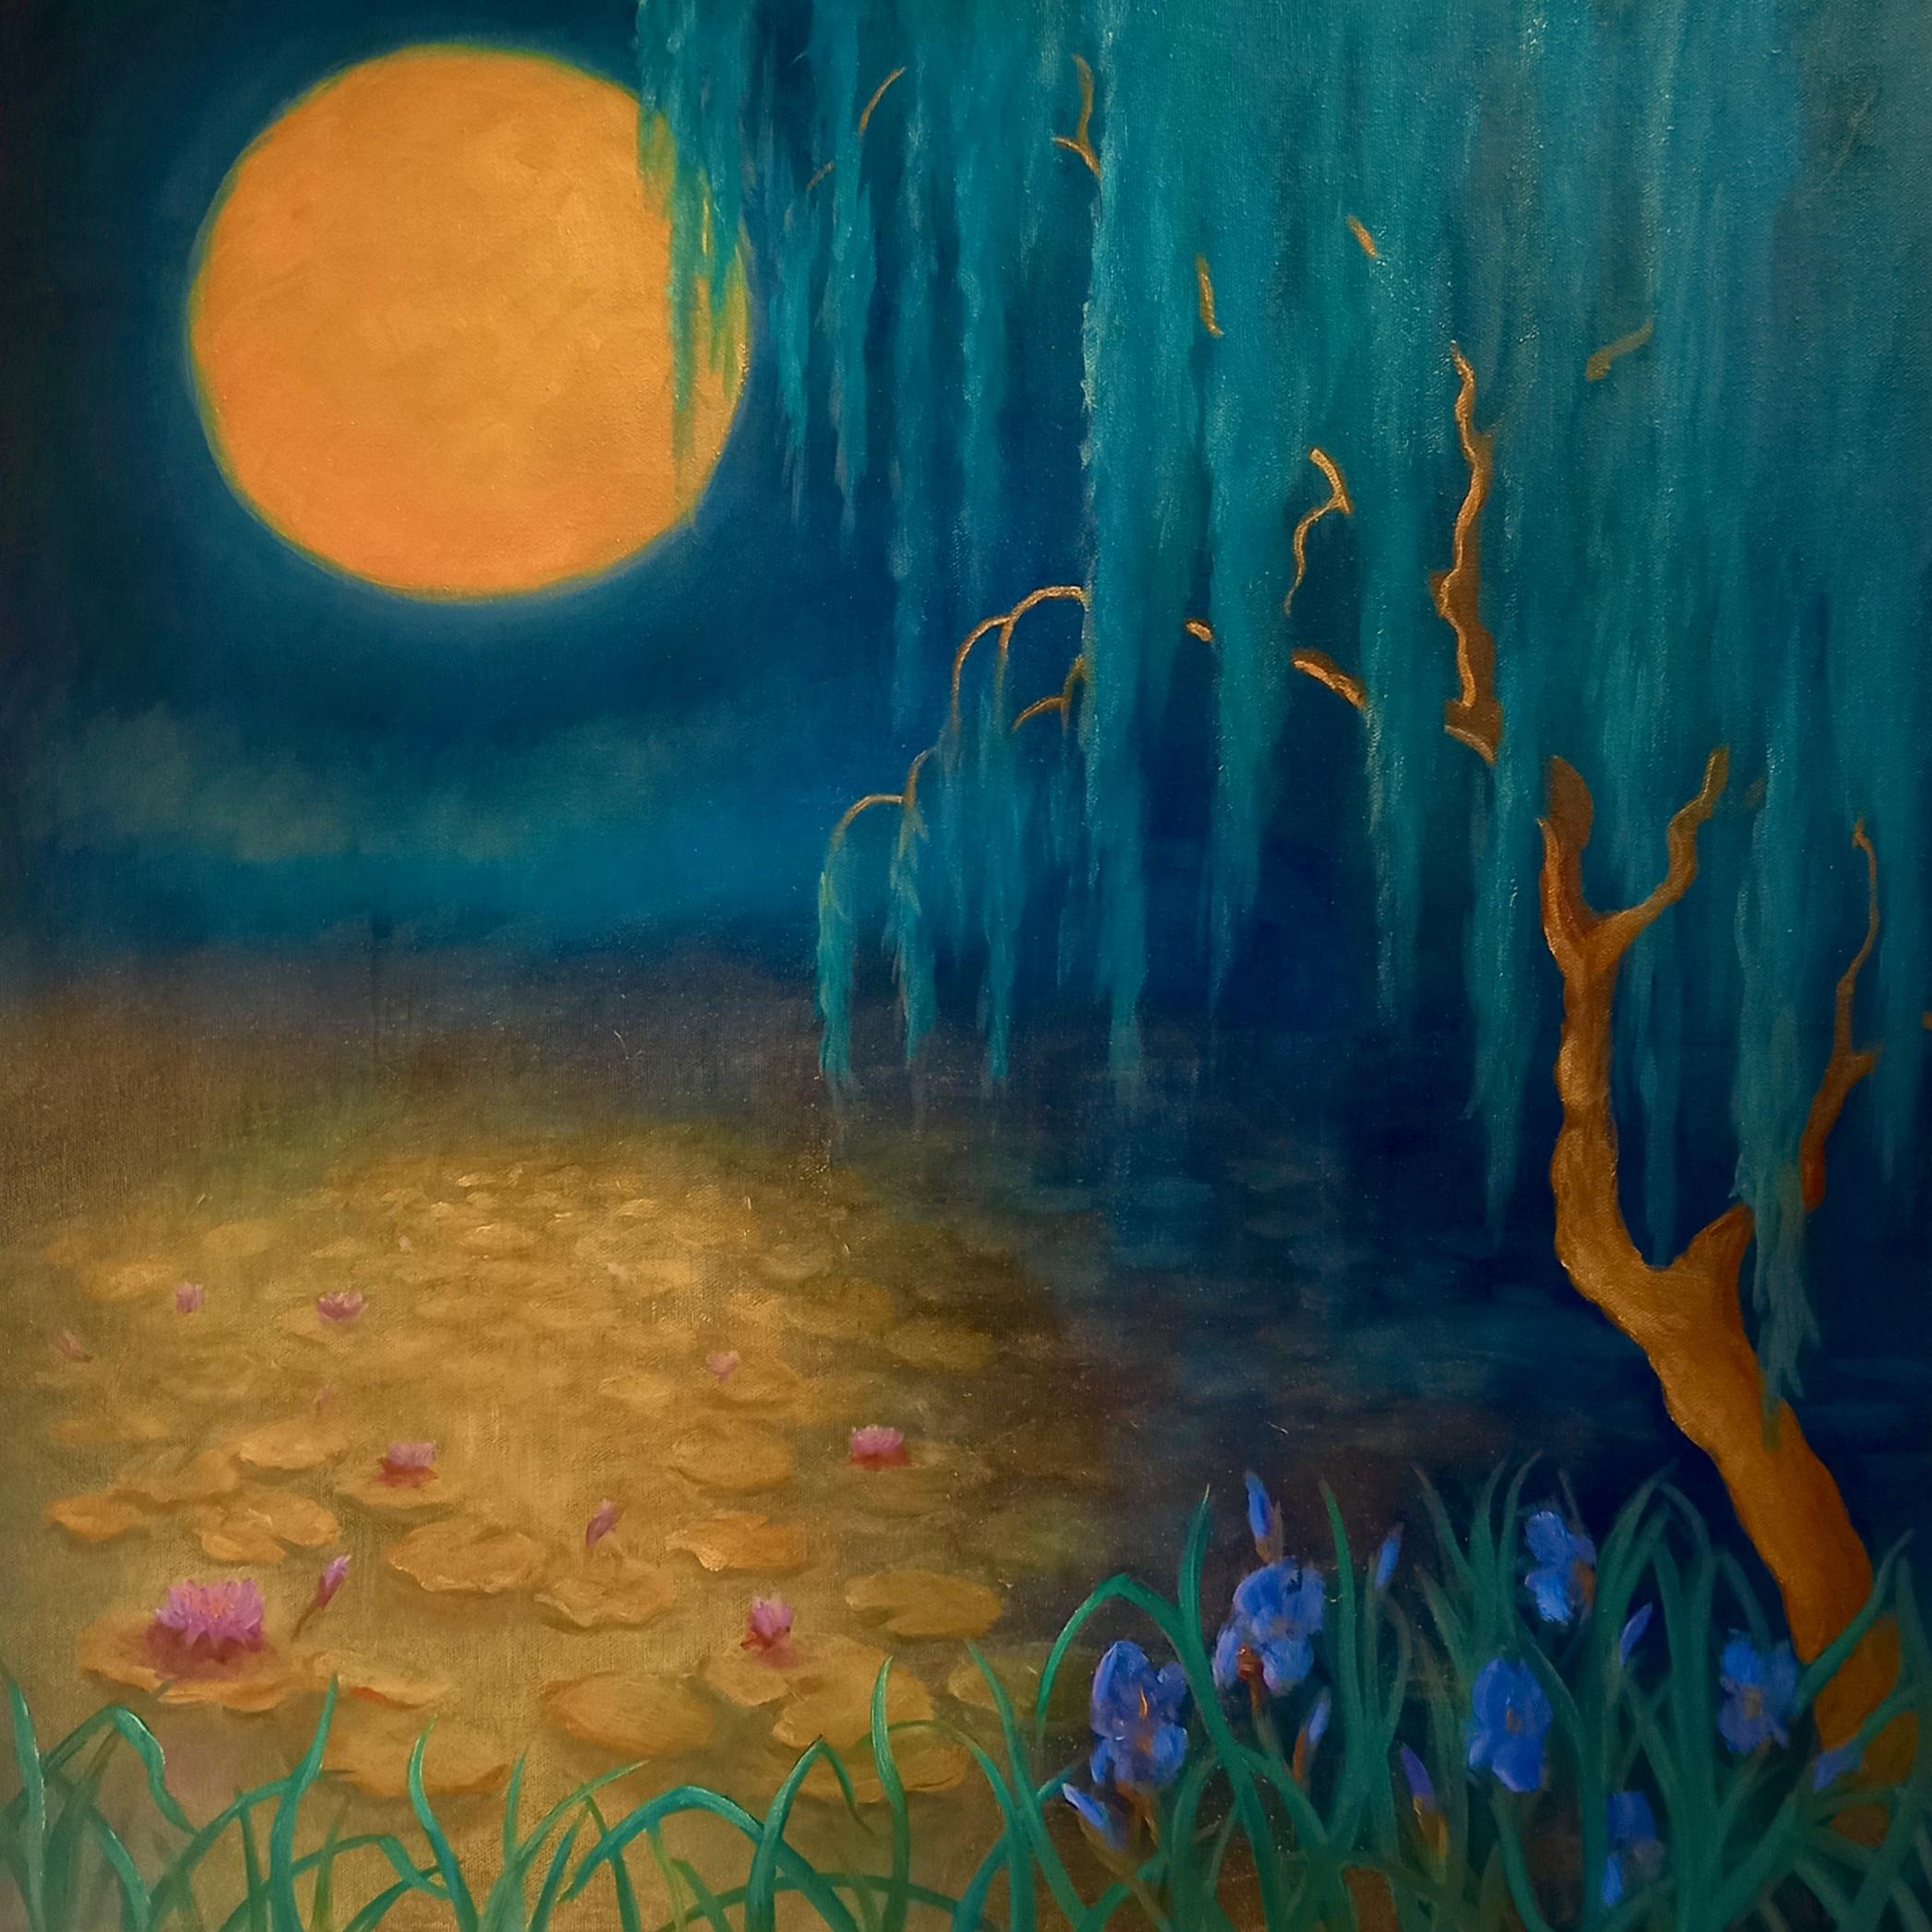 Lee Campbell Landscape Painting - Flower Moon, Original Signed Contemporary Magical Realism Symbolist Painting